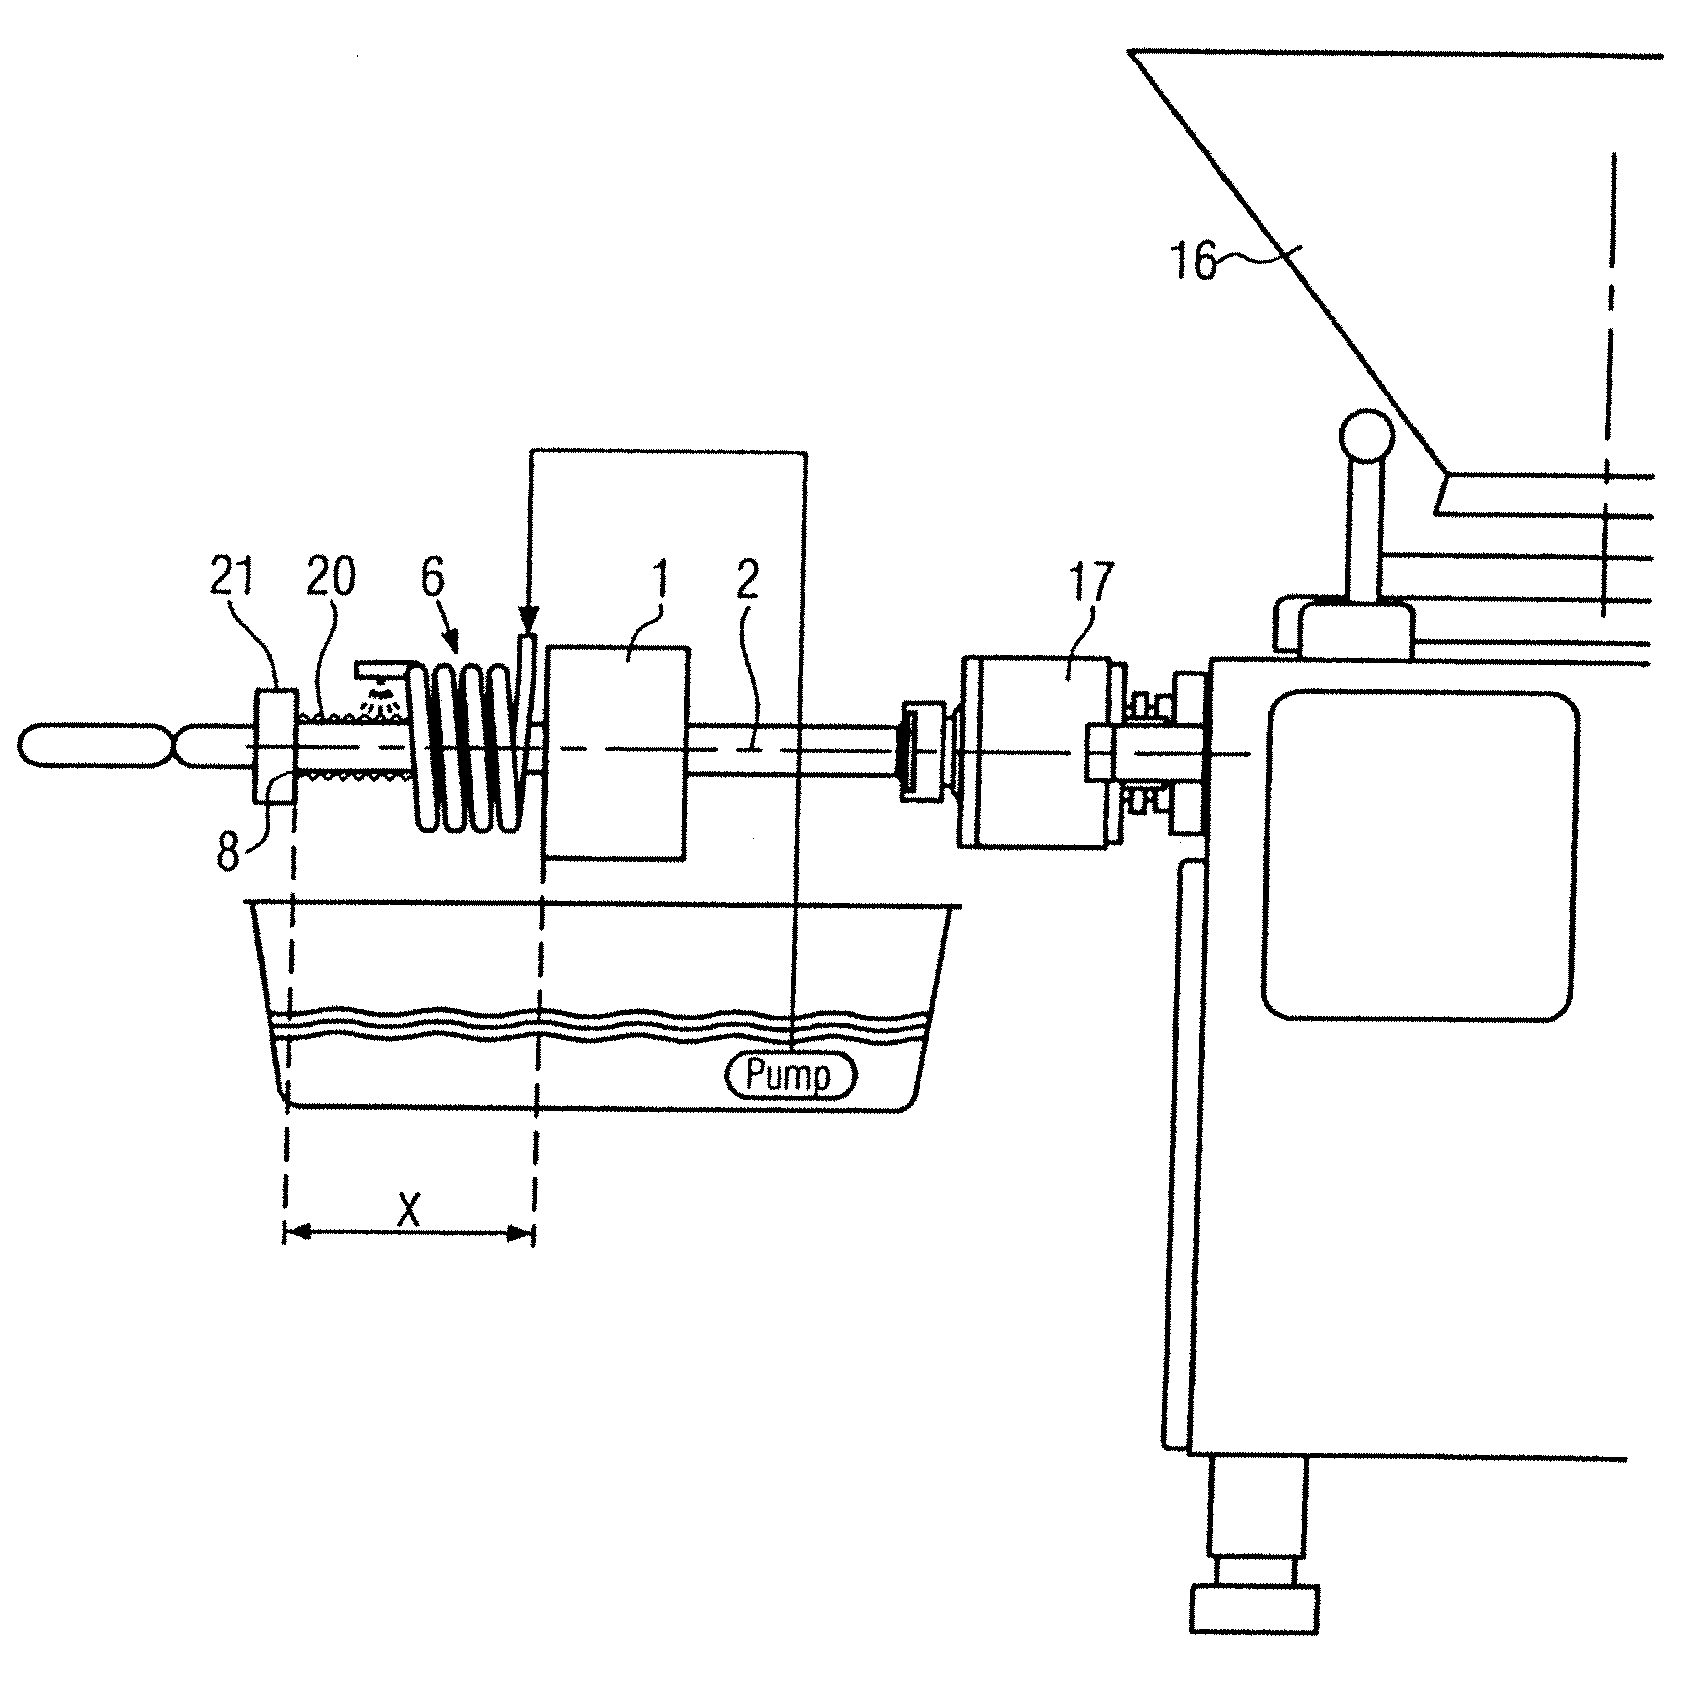 Device and method for manufacturing sausages